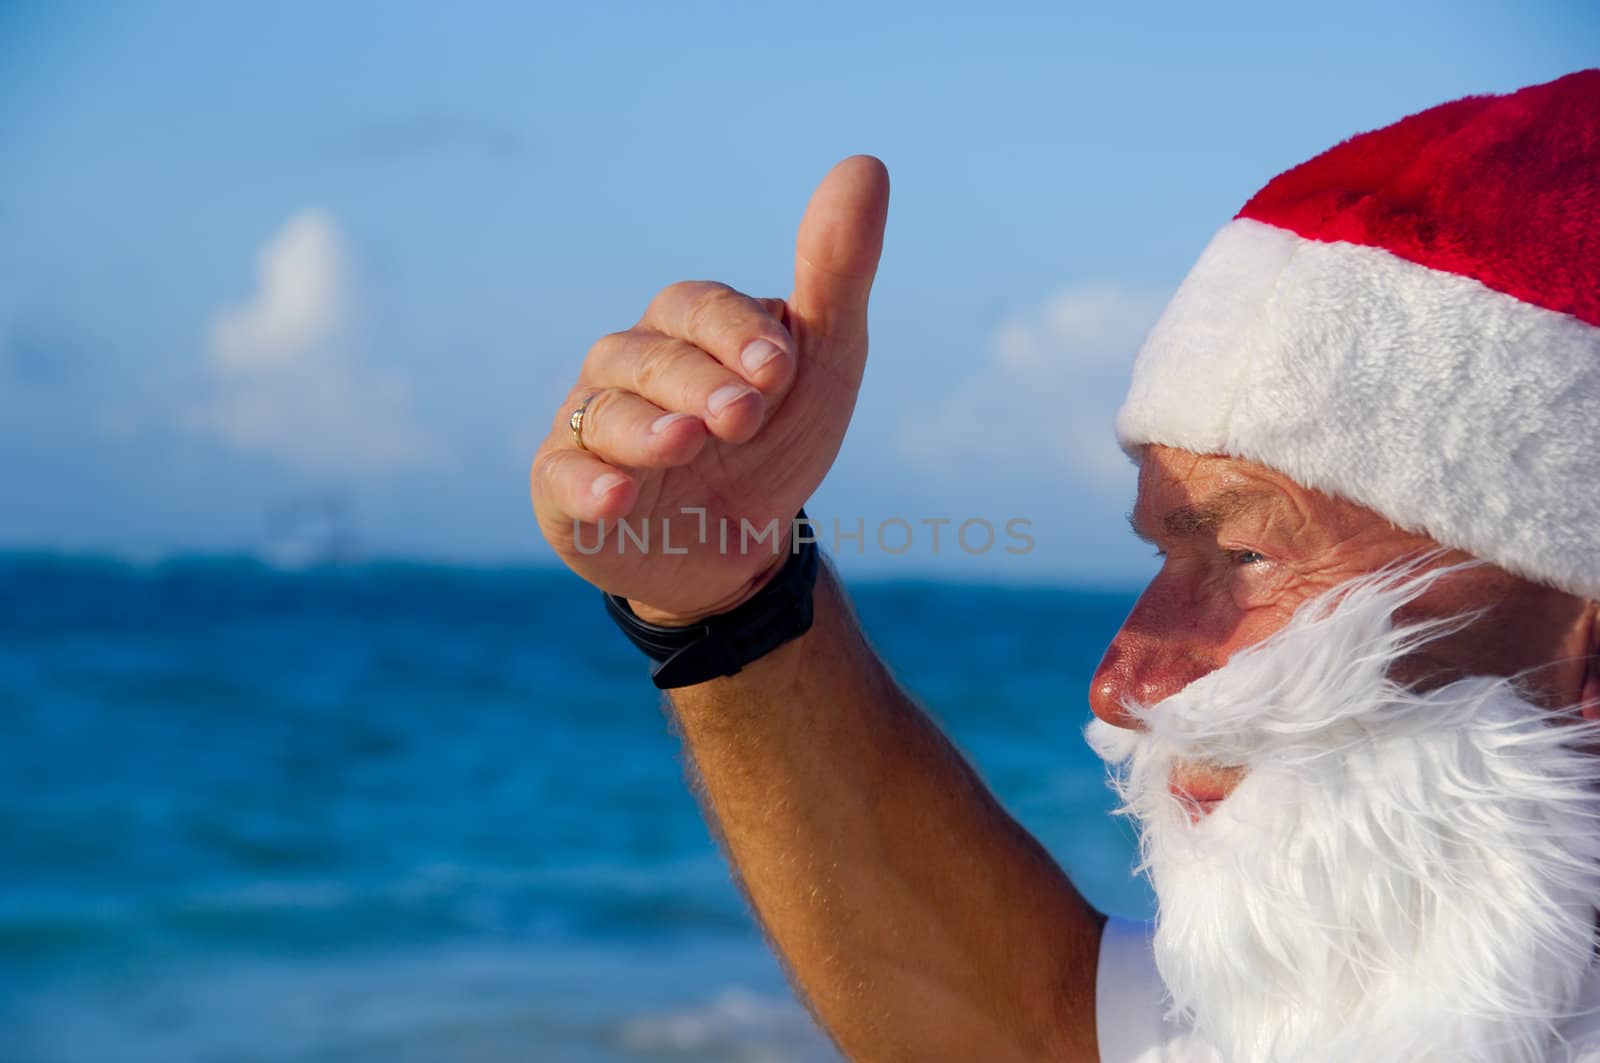 Santa claus is on vacation. He is looking at something on the beach.
